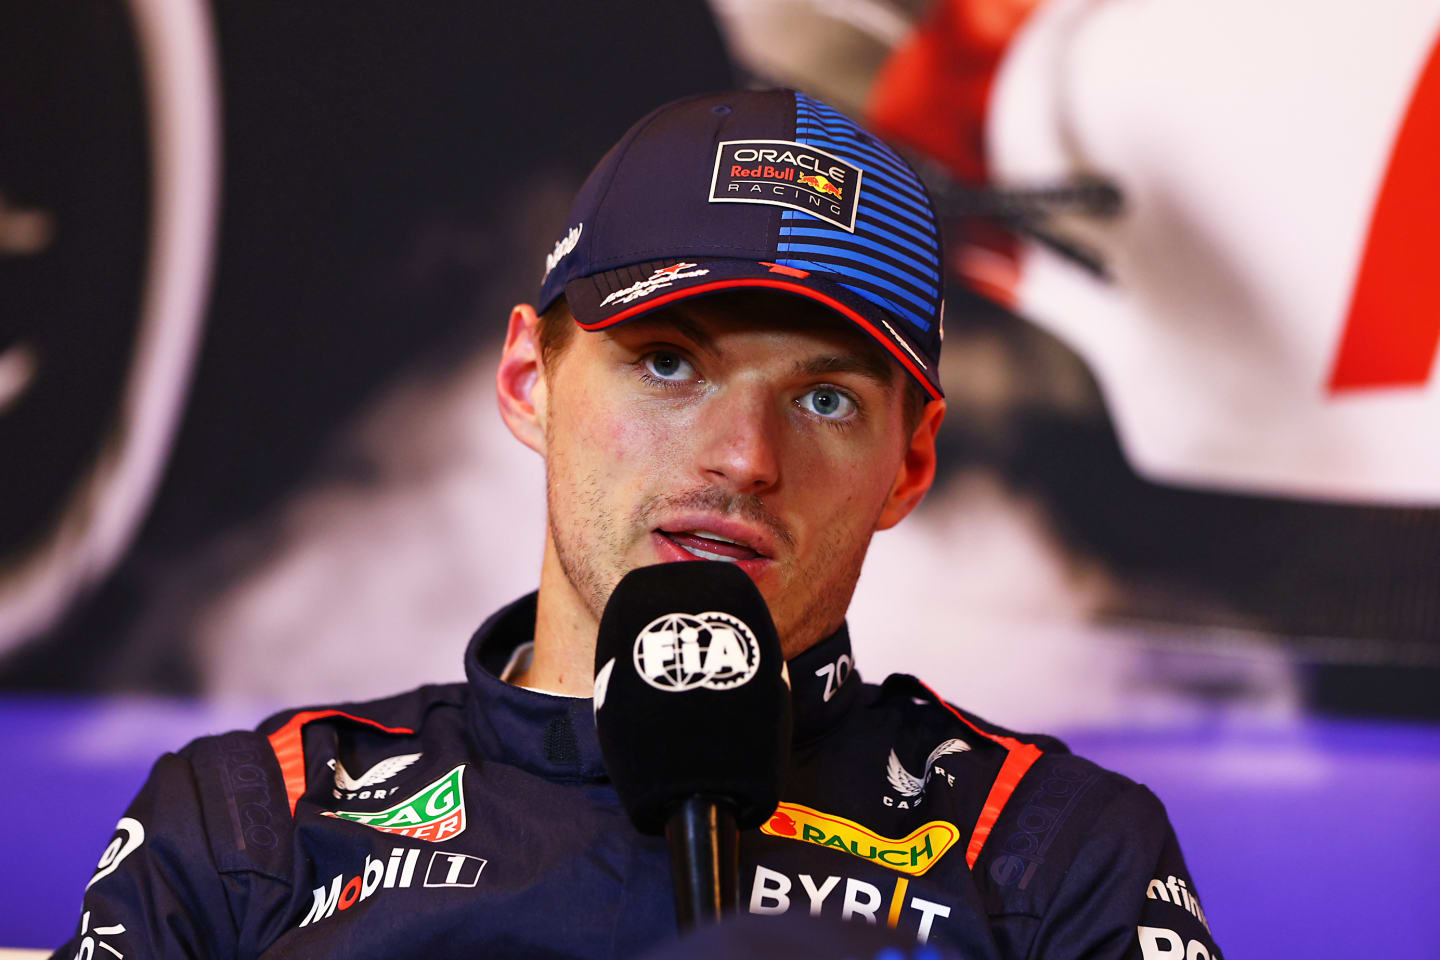 MONTREAL, QUEBEC - JUNE 08: Second placed qualifier Max Verstappen of the Netherlands and Oracle Red Bull Racing attends the press conference after qualifying ahead of the F1 Grand Prix of Canada at Circuit Gilles Villeneuve on June 08, 2024 in Montreal, Quebec. (Photo by Clive Rose/Getty Images)